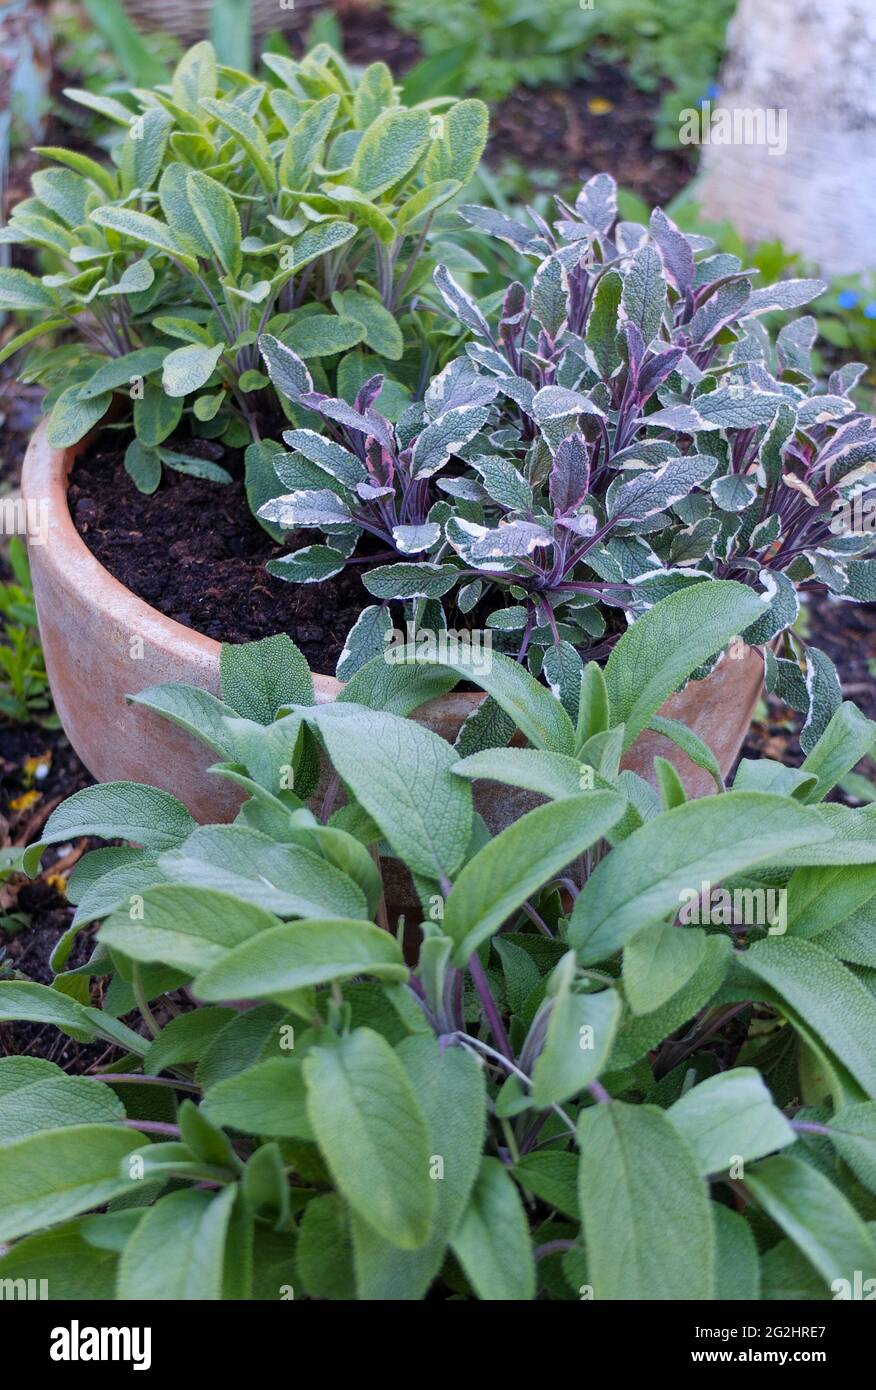 Pot with 3 types of sage: real sage (Salvia officinalis), tri-colored sage (Salvia officinalis 'Tricolor'), yellow-colored sage (Salvia officinalis 'Icterina') Stock Photo